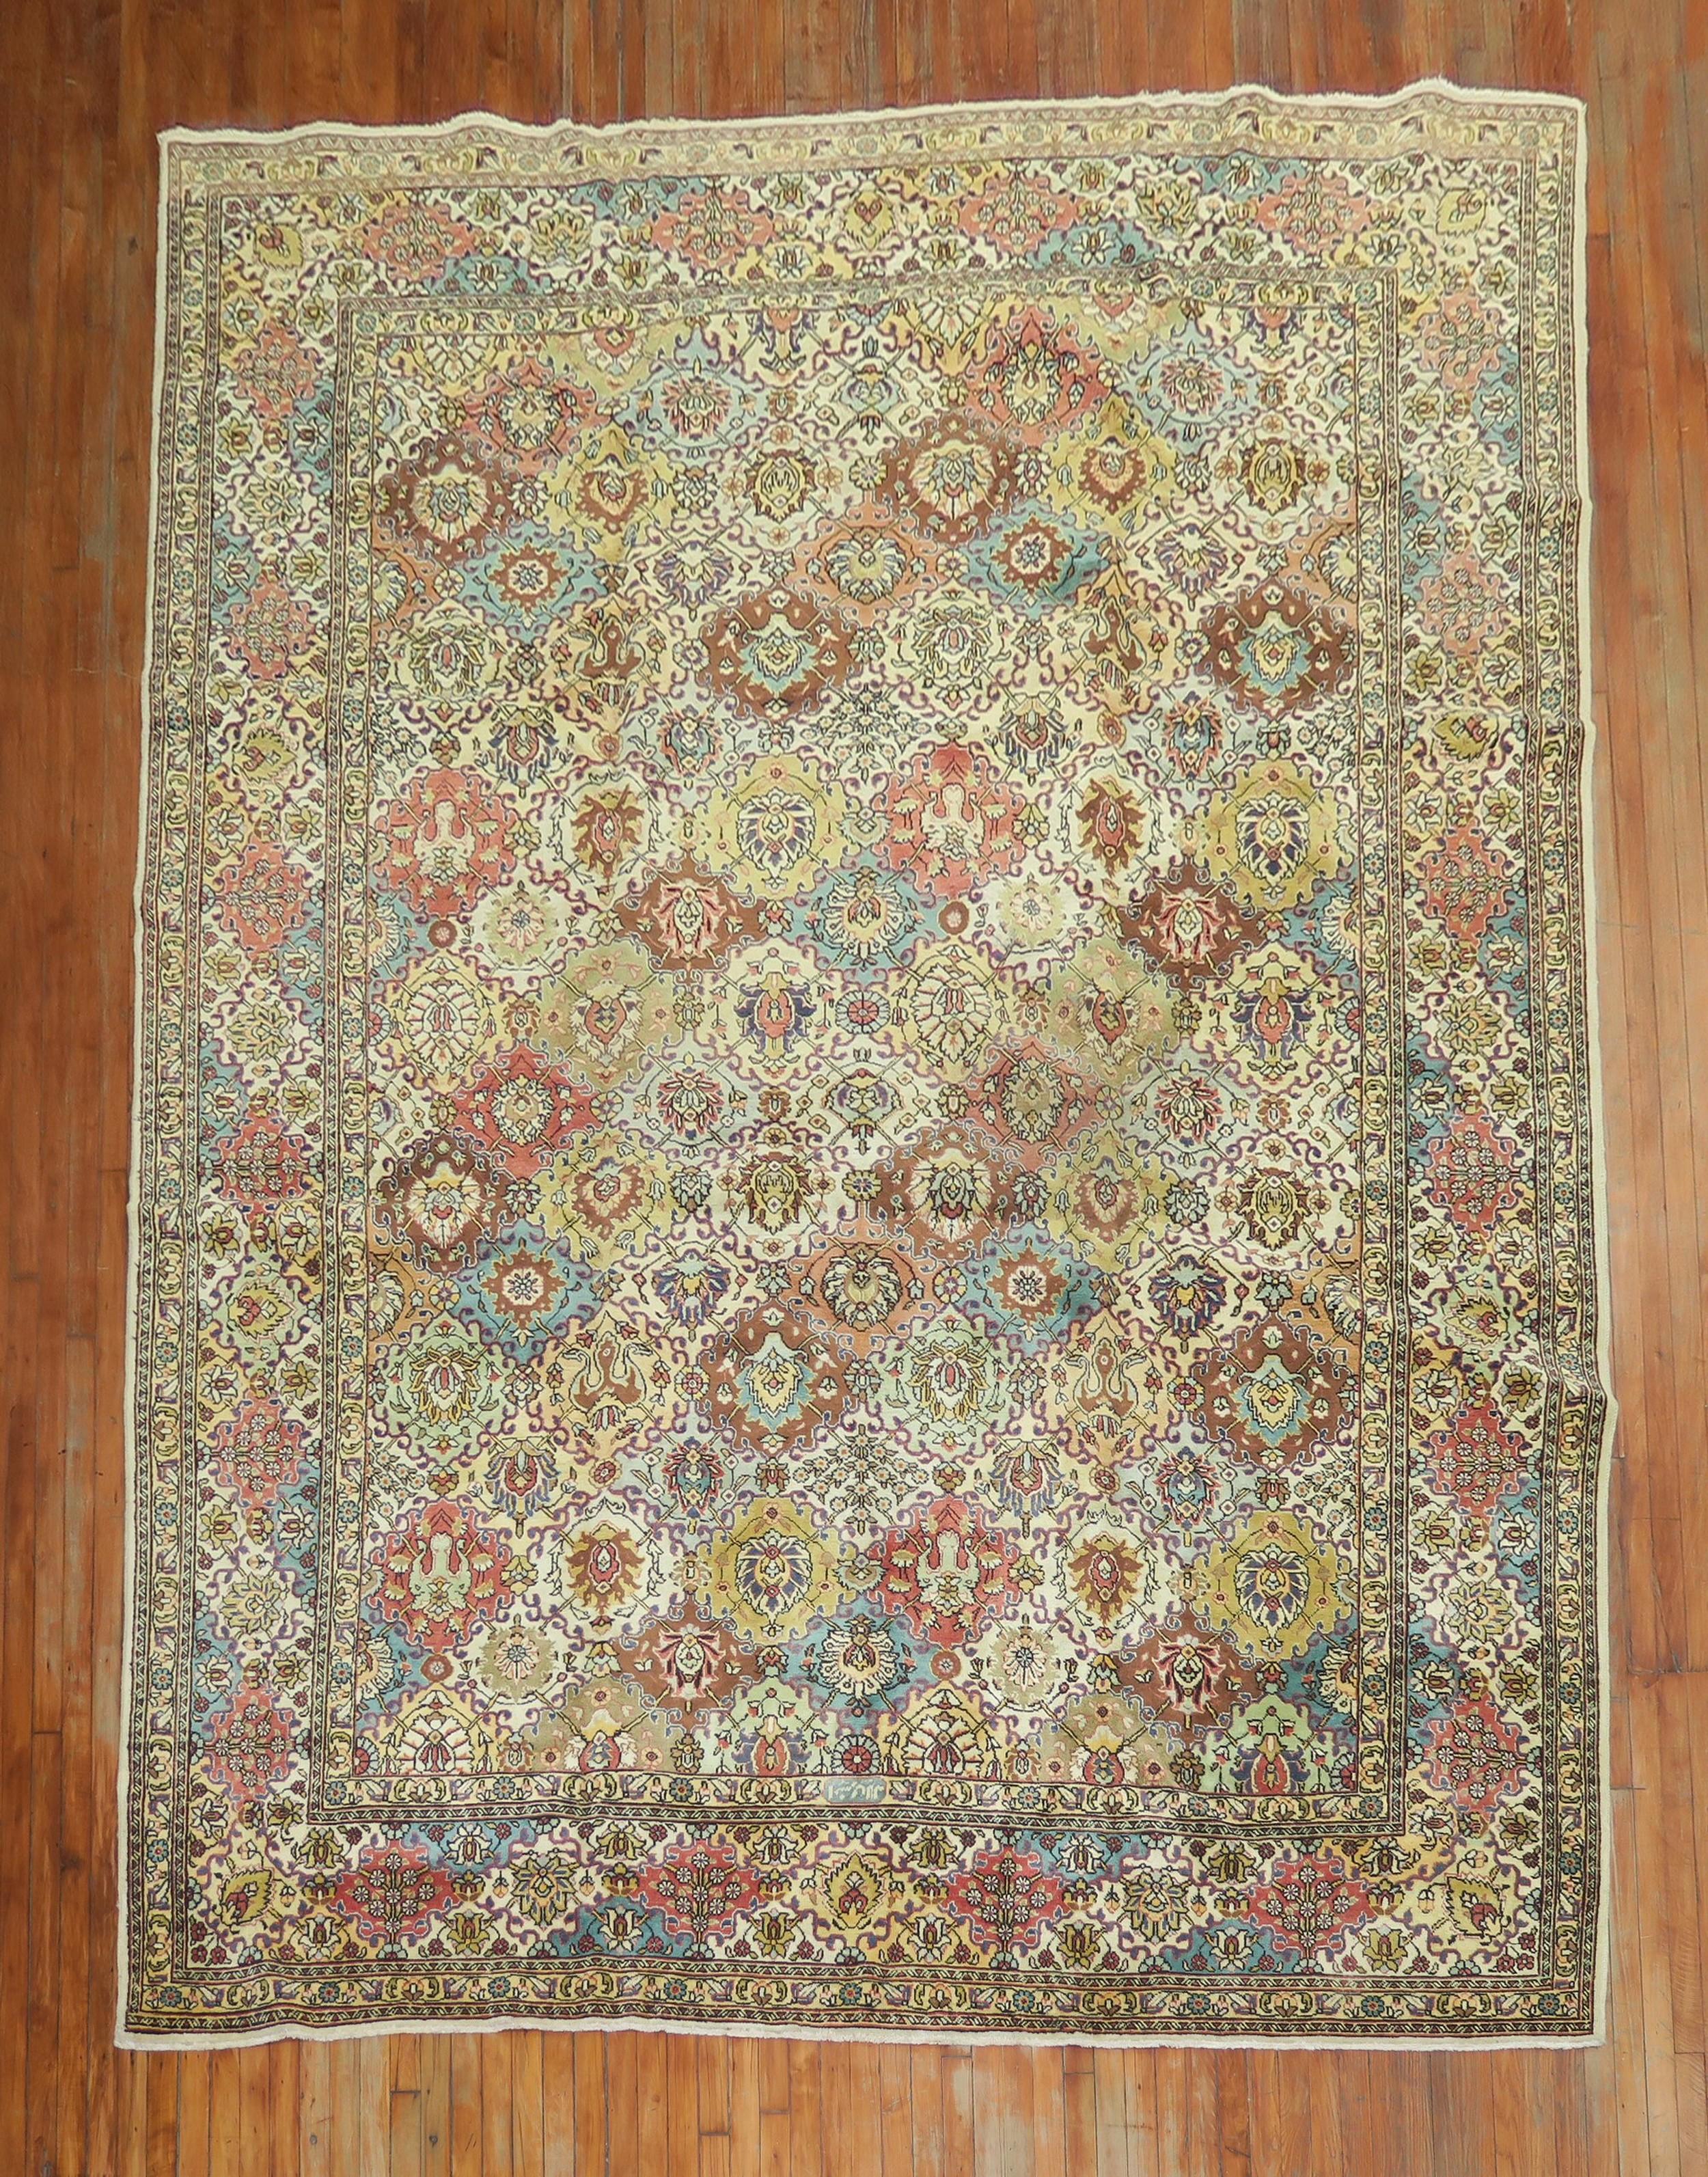 A mid 20th-century all-over pattern Persian Tabriz rug with an array of colors on a creamy yellow field.

Measures: 9'6'' x 13'.